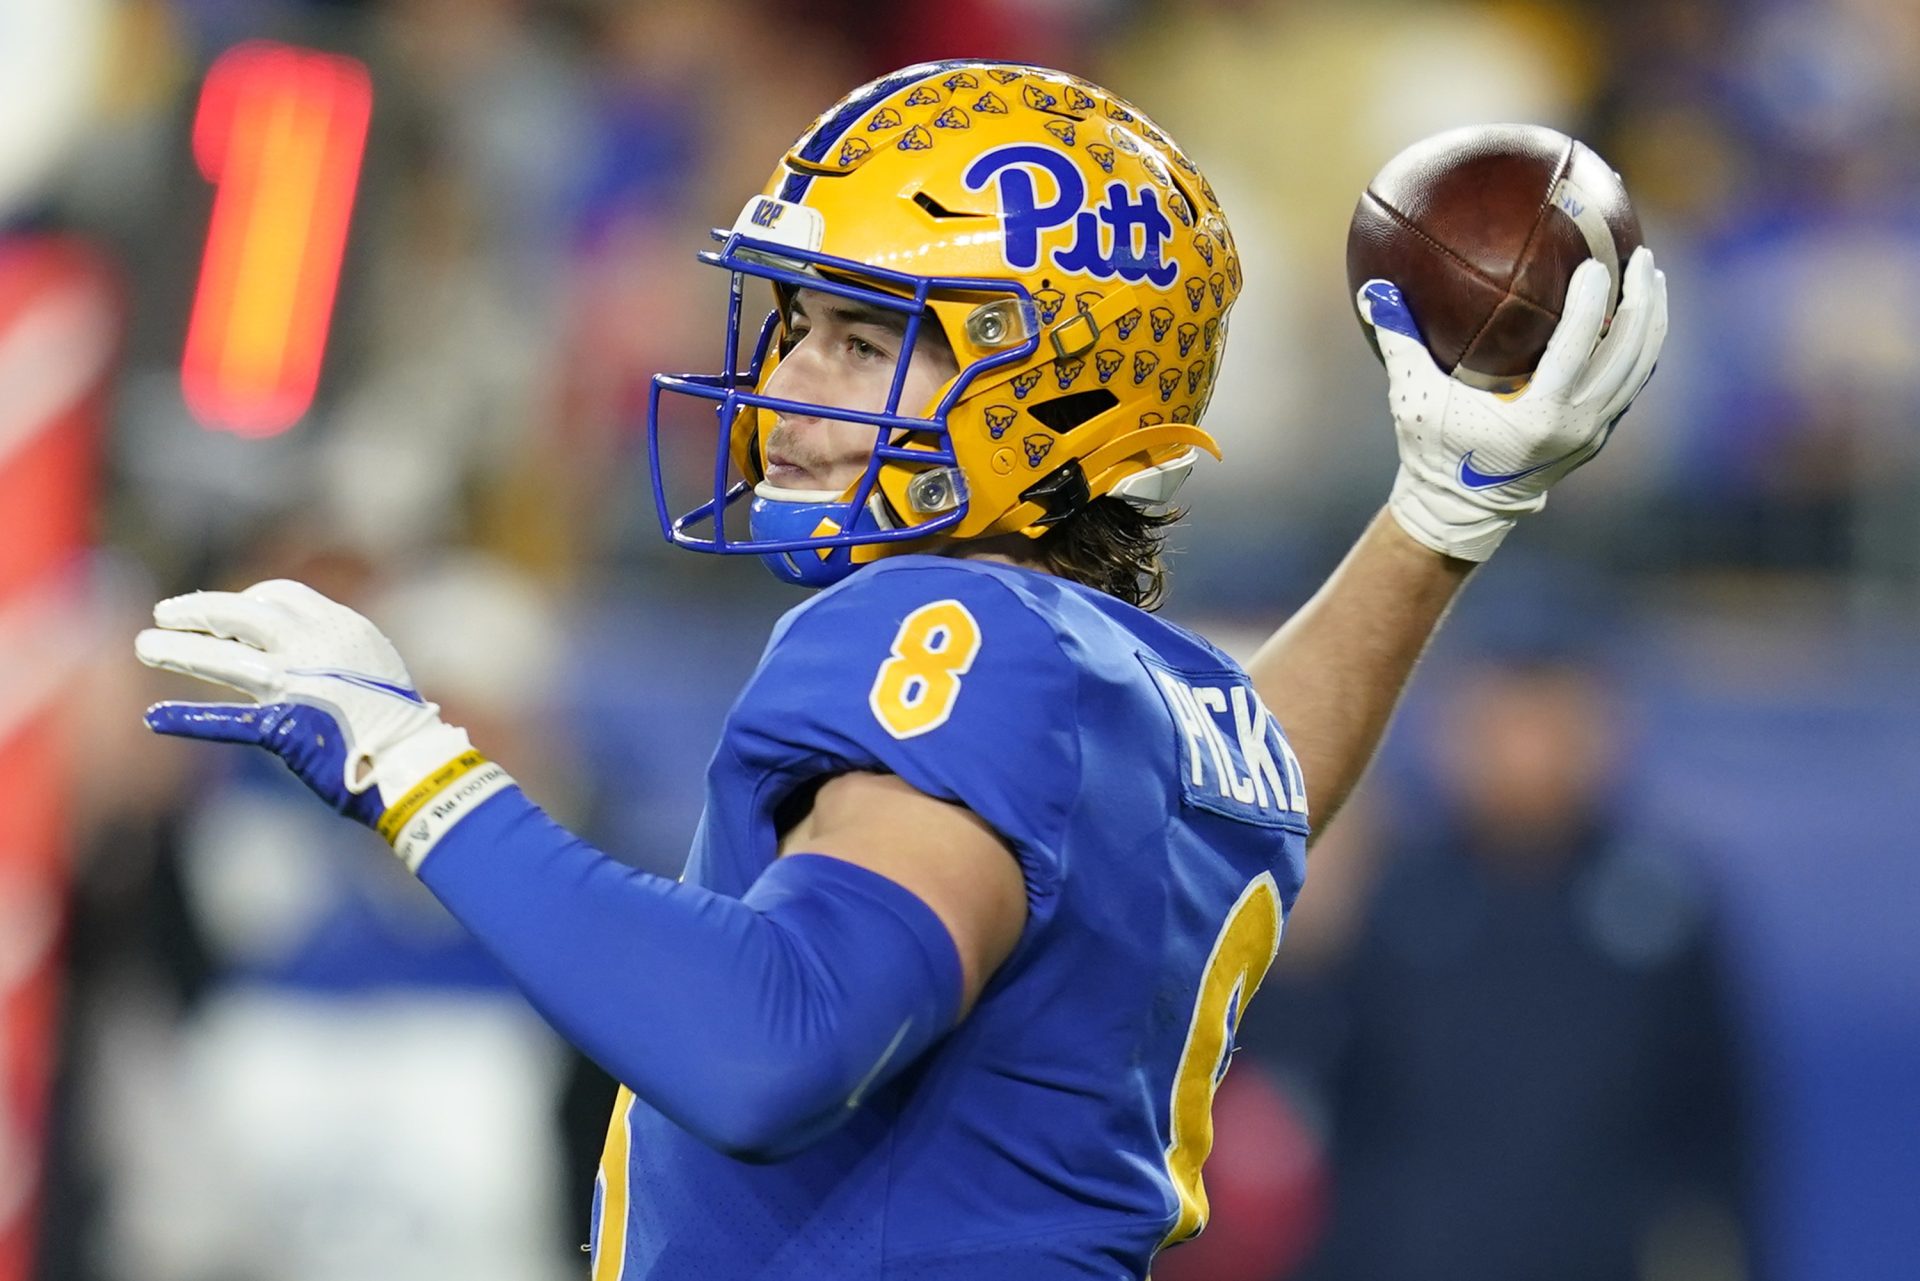 Pittsburgh quarterback Kenny Pickett throws a pass against North Carolina during the second half of an NCAA college football game Thursday, Nov. 11, 2021, in Pittsburgh.